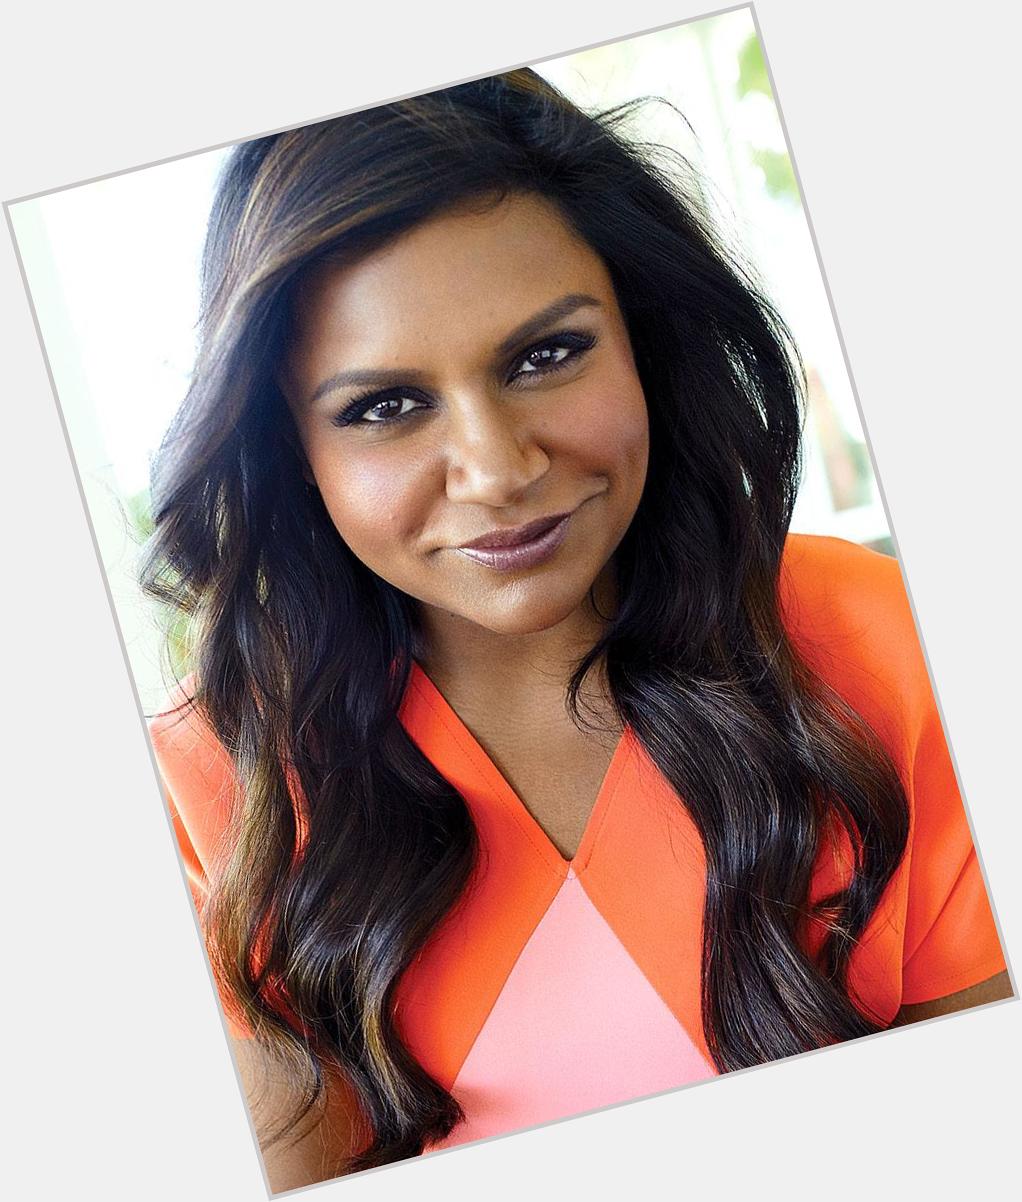 Happy Birthday to Mindy Kaling, who turns 36 today! 